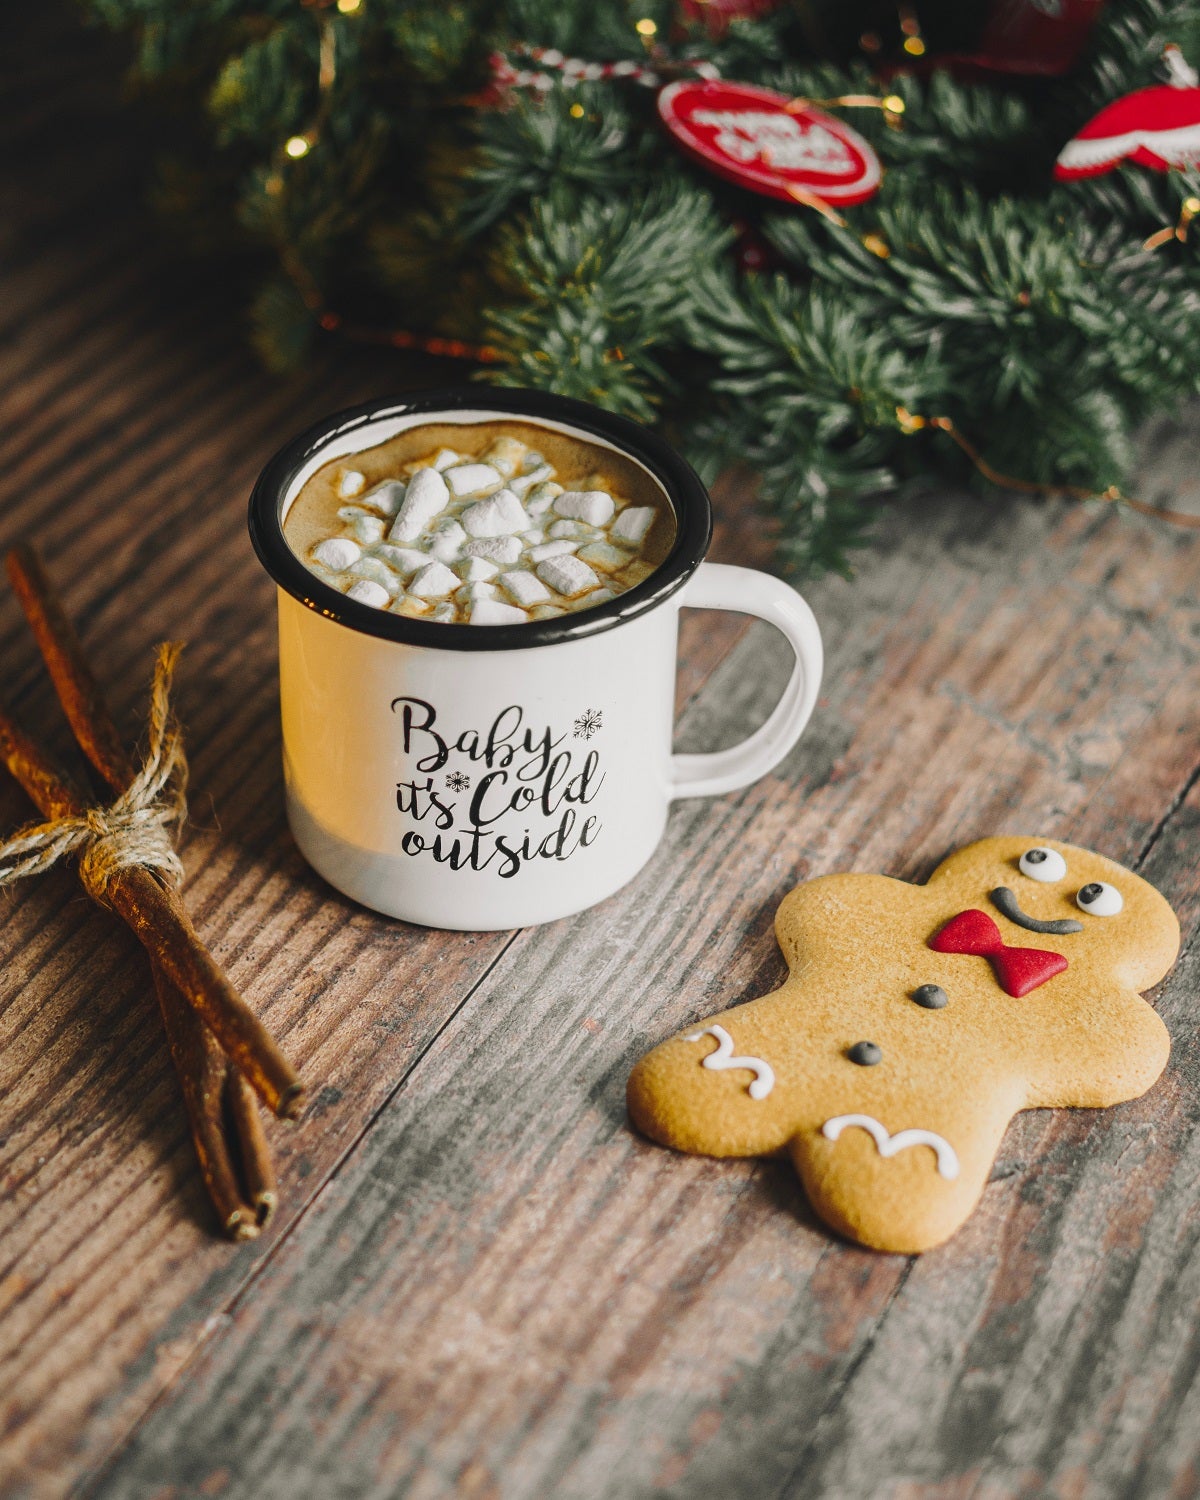 A mug of hot chocolate with marshmallows next to a smiling gingerbread man